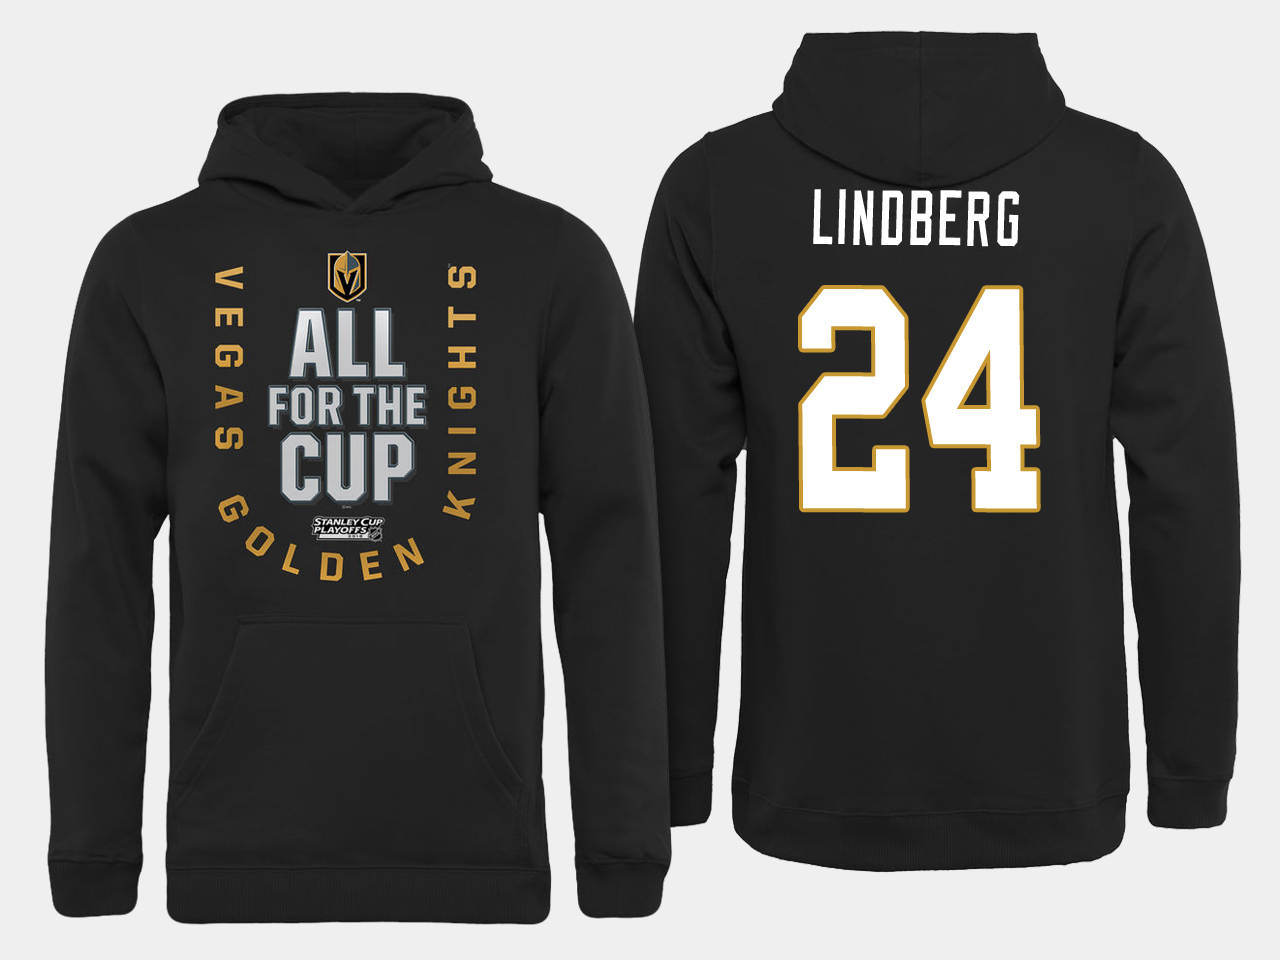 Men NHL Vegas Golden Knights #24 Lindberg All for the Cup hoodie